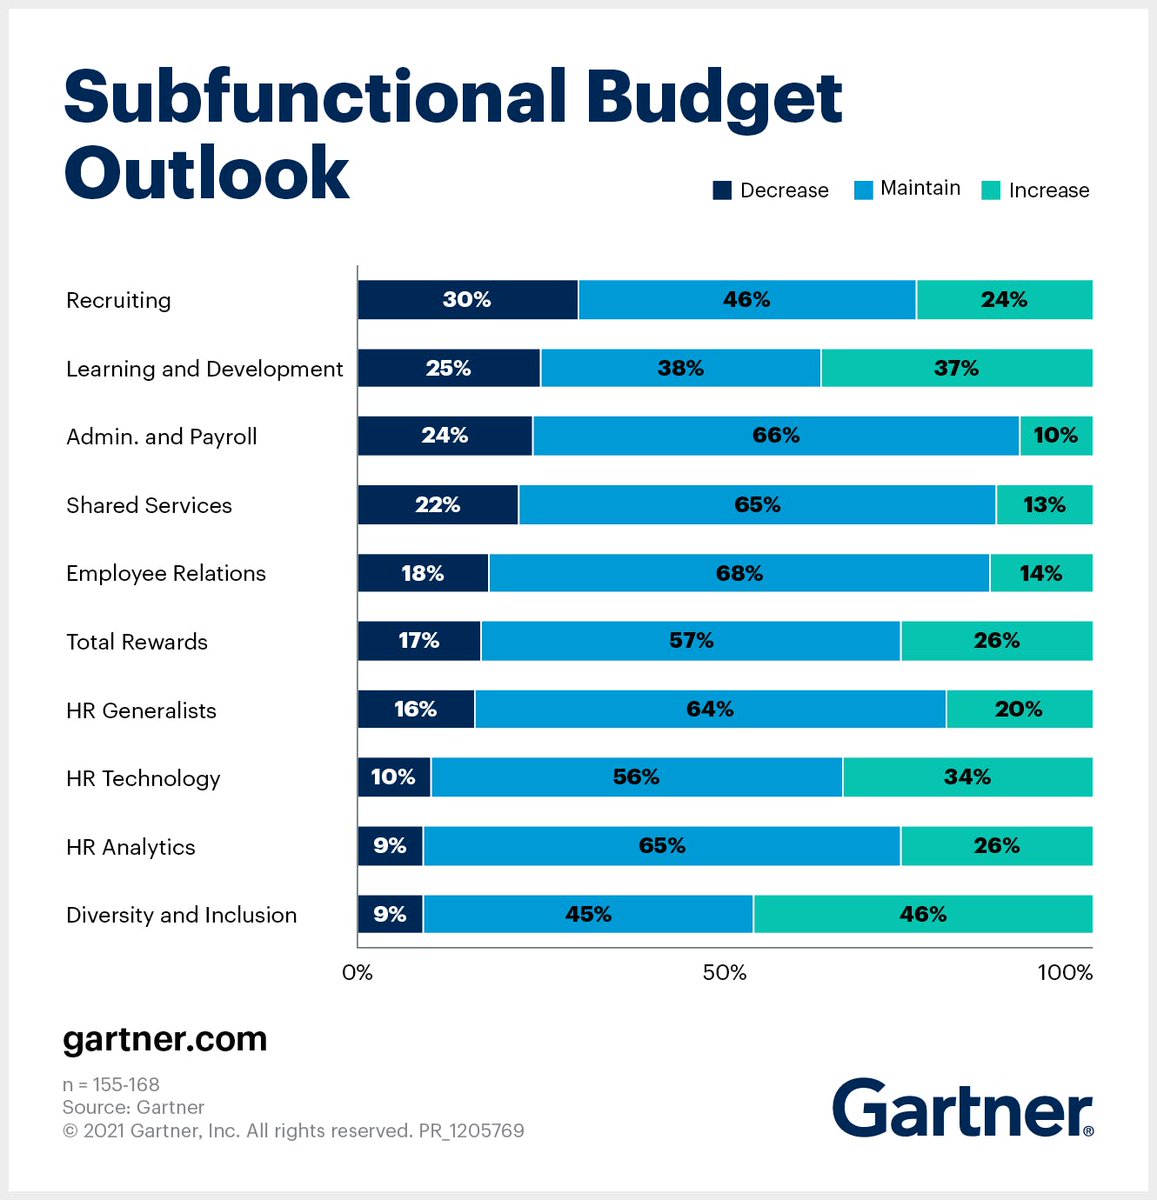 Gartner studies report that priorities in HR function budgets are likely to keep shifting in 2021 - Research shows more than one-third of respondents want to increase their HR technology budgets.

#HR #technology #futureofwork #hcmtechnology gtnr.it/2Q3J9zV